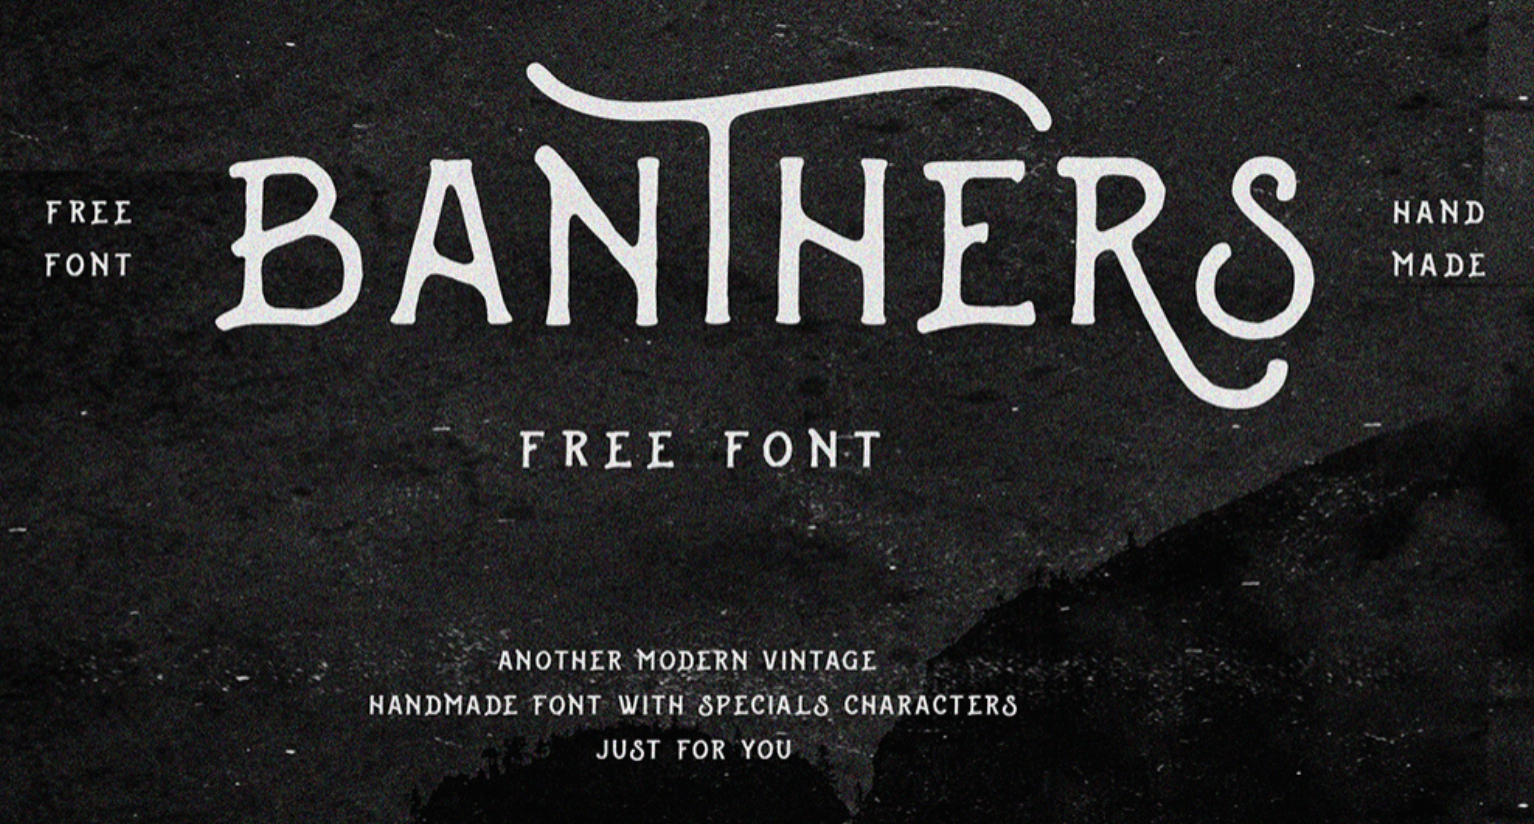 Banthers free font 